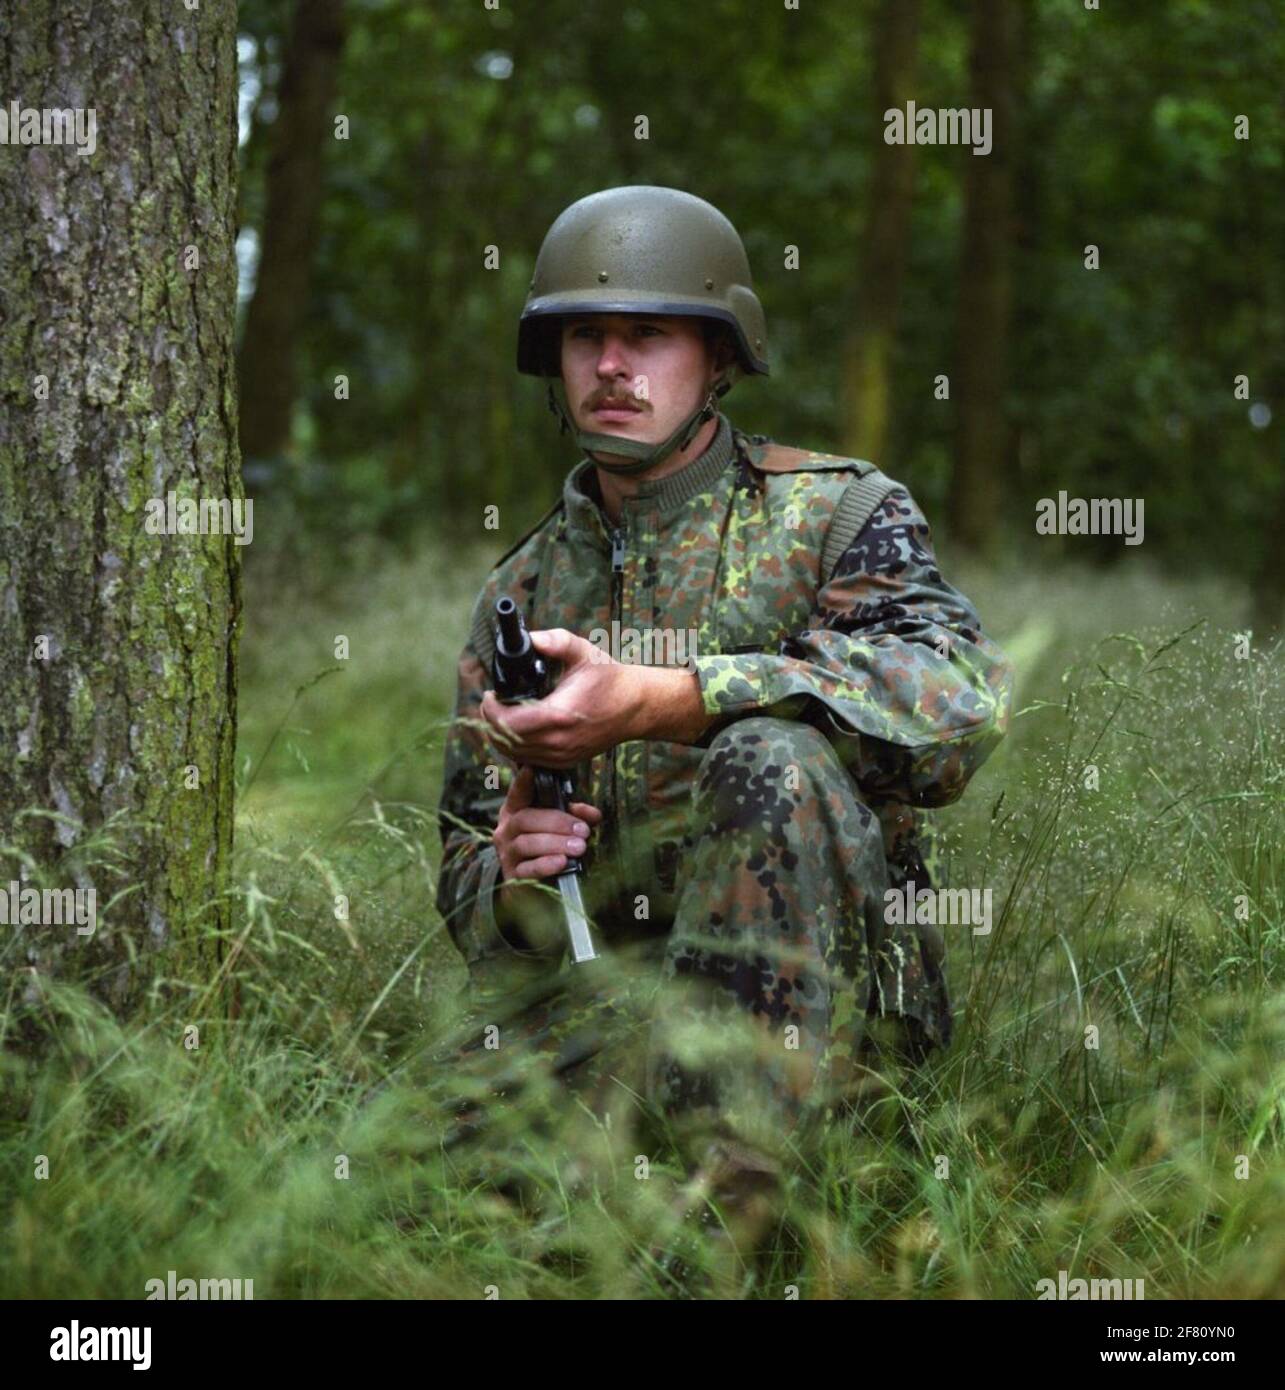 A soldier of the royal army in a test uniform made of material with a stain pattern ('flecktarn') as used by the German army. This type of uniform was not entered. Stock Photo